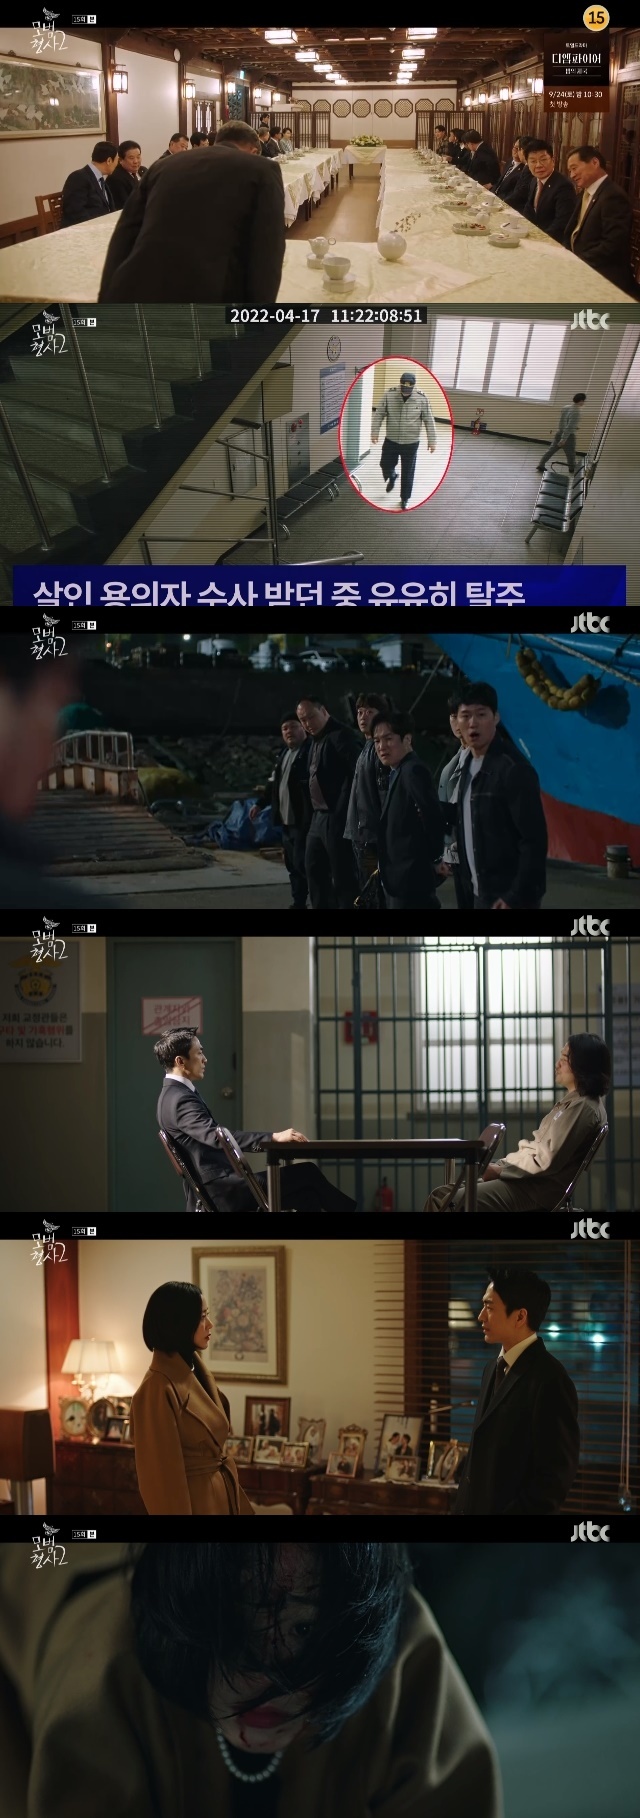 Kim Hyo-jin was the real killer who killed both Ha-yeong and Jung Moon-sung who committed Affair.In the 15th JTBC Saturday drama Model Detective 2 (played by Choi Jin-won, directed by Cho Nam-guk), which was broadcast on September 17, the strong 2 team continued Susa on Chun Nana (Kim Hyo-jin).The incident occurred in Seoul, but the incident was assigned to the powerful 2 team of the Incheon West Police Station because Chun Nana invited Kang Do-chang (Son Hyun-joo) and Jang Seung-jo to the venue.In this work, the chief showed a passive attitude, but Oh Ji-hyeok showed his will to the incident by walking to his gangnam building.The two strong teams, who were promised to share the Gangnam District building even if they were cut by the police by external pressure, actively did Susa for Chun Nana.Oh Ji-hyeok saw Chun Nana as murdering Woo Tae-ho (Jung Moon-sung) and Chung Hee-ju (Ha-yeong).The strong 2 team also secured a fingerprint test at the time of the Woo Tae-ho traffic accident, which was hidden by the Transportation Department.It was clear that Chun Nanas fingerprints came from the seat belt swivel and steering wheel of the accident vehicle.Then Chun Nana appeared directly in the 2nd strong team to make a victim statement, and said, Mr. Taeho did not want to make an extreme choice, what I wanted to die with him.I thought that only I could survive was to reveal the killer who killed Chung Hee-ju, so I helped ODetective. Oh Ji-hyeok did not believe this, but decided to pretend to move on. Oh Ji-hyuk said, Chun Nana is the first to hold a T. Jay.I came to warn you that if you interfere with it, you will not let it go. At the same time, Shim Dong-wook (Kim Myung-joon), the youngest member of the powerful team 2, was arrested on charges of bribery and bribery.Shim Dong-wooks brother invested in stocks without telling his brother even after receiving 300 million won in blind money from T-Jay affiliates. When the result of the identification that Chun Nanas blood came out of Chung Hee-jus remains leaked to the strong team 2, he hid it and tried to cover up all of his sins on the strong team. It was a scheme.)Oh Ji-hyeok said, We have to make a much stronger back than ChunNana to reverse the current situation.Oh Ji-hyeok summoned Chun Sung-dae to the Western Division of Incheon using a transcript that Chun Nana provided to the 2nd strong team, which could lead to the attempted murder of his daughter.I am convinced that it is Mr. ChunNanas own play. Asking the president to cooperate with Susa.Please stop that obstruction, he said, or he intended to reveal the transcript to the media.However, Chun Sung University said, Please tell the recording file media. I must be responsible for what I said. Gang Chang, Oh Ji Hyuk Detective.The person I remember my name is either a person who has done me a great virtue or a person who has given me an unforgettable disgrace.Whatever the memory in a sense, I do not think you will ever forget your name. At this time, Oh Ji-hyeok once again set up a place with Chun Sung-dae. Oh Ji-hyuk told him, Susa, who reveals that we do not kill Chung Hee-ju,Then, Chun Sang-woo is released innocent, and eventually obtained permission to cooperate with Susa. Then Chun Sung-dae called his acquaintances, Jeong Jae-gye, and said, Help me. After that, Jung Gi-jin and Gwangsudae were seized and seized. The charges against Jung Gi-jin were also released by Kim Dong-jae Murder and Jung In-bum Murder.The inspection of the powerful 2 teams in the West of Incheon was suspended by the head of the Seoul Metropolitan Government.Jang Gi-jin, who was driven to the edge of the cliff, promised Koo Jae-chun (Lee Ho-cheol) a large amount of money, and then he escaped by wearing a police uniform.But before killing Koo Jae-chun, a strong team hit the scene, and Jang Gi-jin and Koo Jae-chun were taken away without a word, and then Kang Do-chang made a statement by pretending to side with Jang Gi-jin.Koo Jae-chun said, This man tried to kill Chung Hee-ju grandfather, and he also handed over the man.On the other hand, the truth was revealed four months ago. In the past, Dong-jae revealed to Woo Tae-ho that Chung Hee-jus Murder is Chun Nana.So, I checked the car record of Chun Nana and headed to the villa. Why did you come here the day when Chung Hee-ju was murdered?Chung Hee-ju asked why he brought him here, and Chun Nana said, I asked him, why did you love someone named you? Was it painful when she died? How about today. You know that. Its as painful as it was then. I didnt love you.If I loved you, I would have killed Chung Hee-ju. But I did not kill Chung Hee-ju. What you are doing is wrong.Chung Hee-ju was killed by my brother, Chun Sang-woo. 